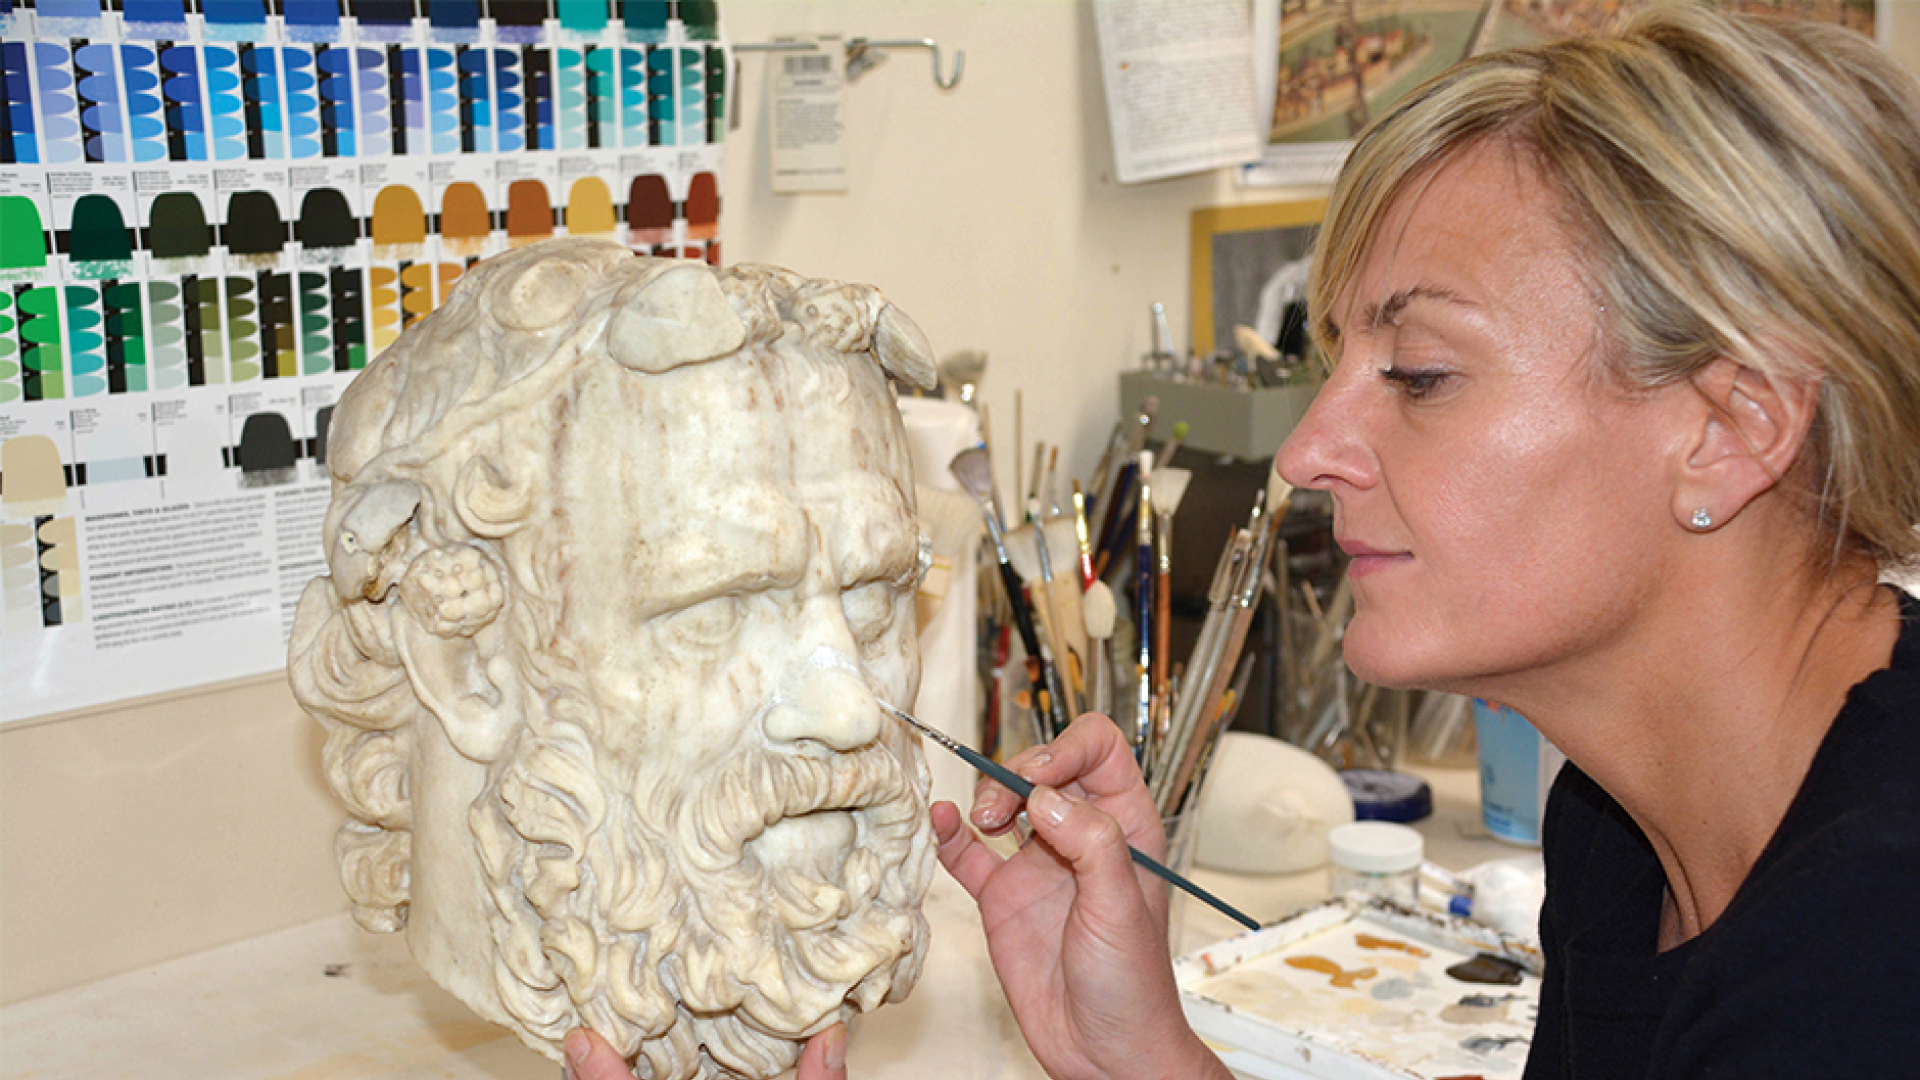 Laura Lipcei painting a Greek statue.